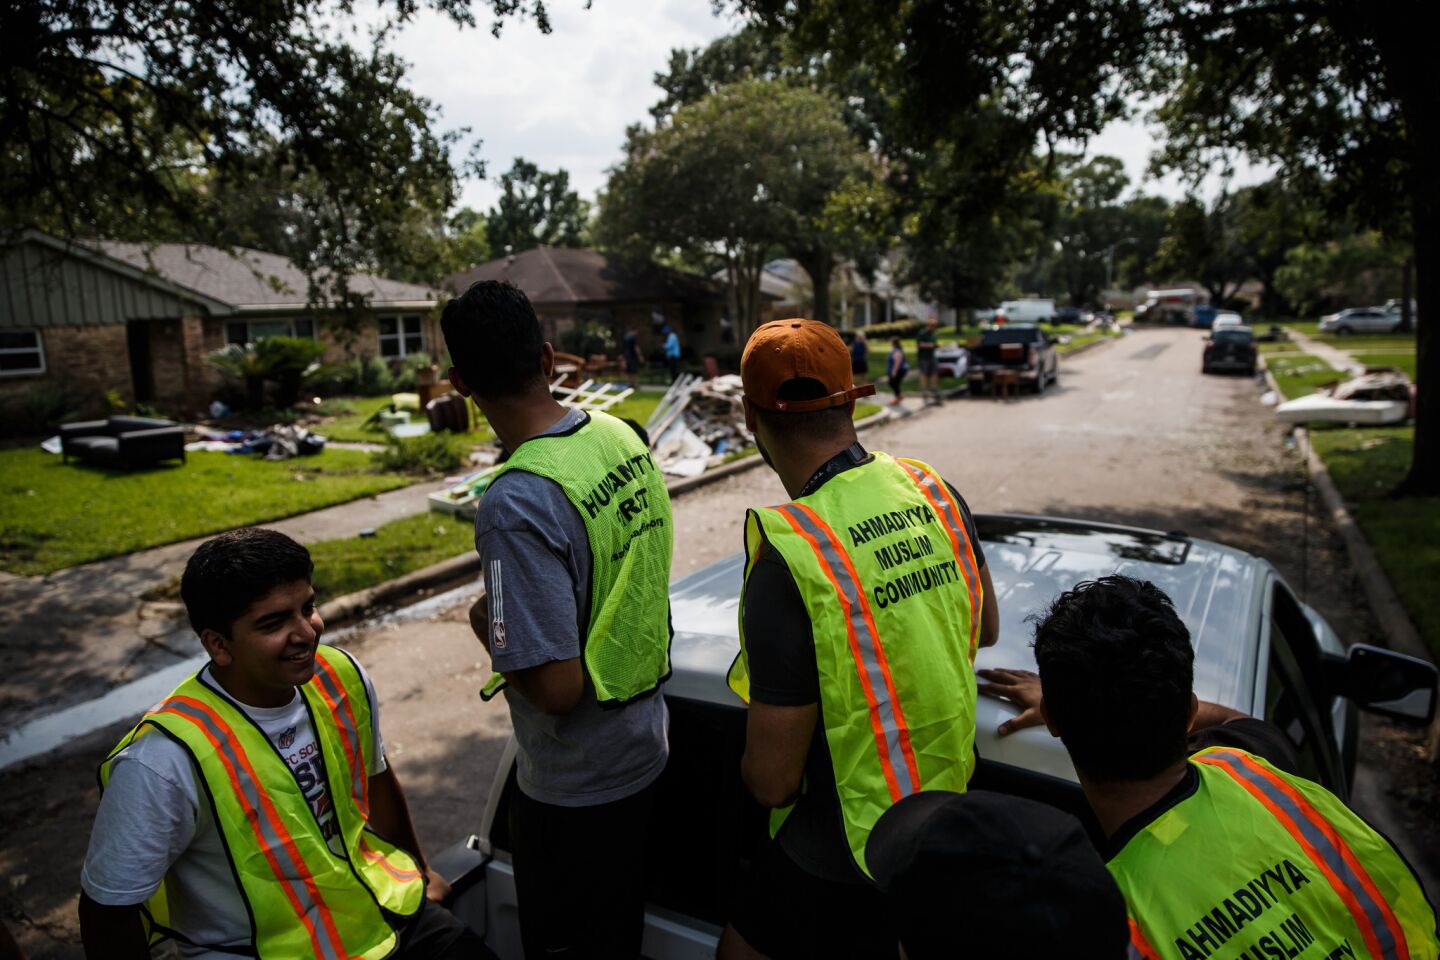 Volunteers from the Ahmadiyya Muslim Youth Association help residents of the Westbury neighborhood in Houston clear debris from their homes. It is also the Islamic holiday of Eid-ul-Adha. (Marcus Yam / Los Angeles Times)